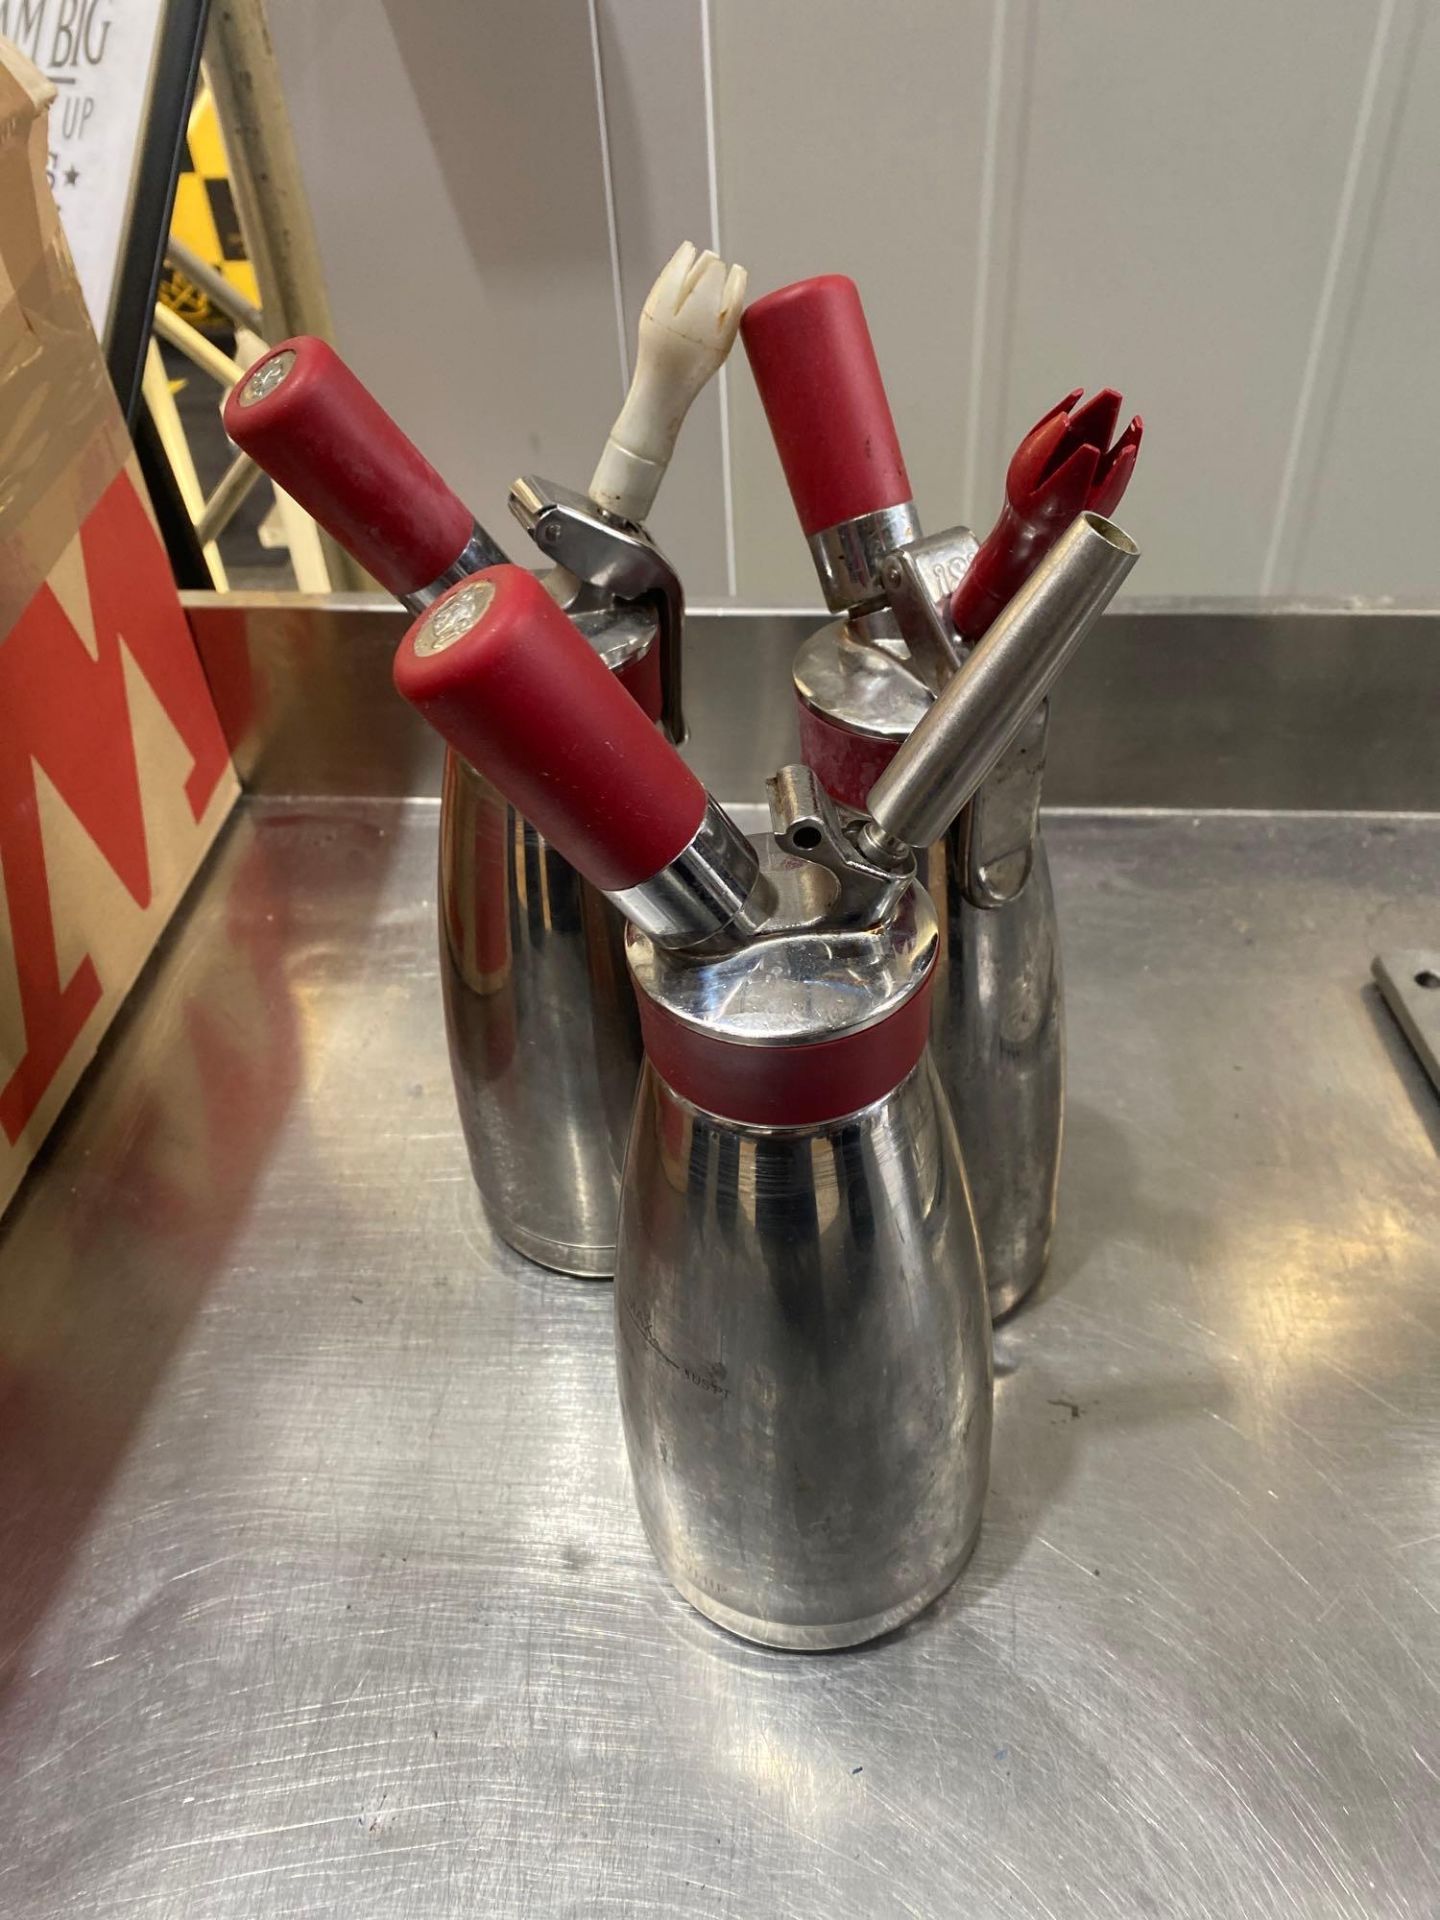 3 x Isi Thermo Cream Dispenser 500ml Stainless Steel For Chilled Cream Or Hot Sauces Double Walled